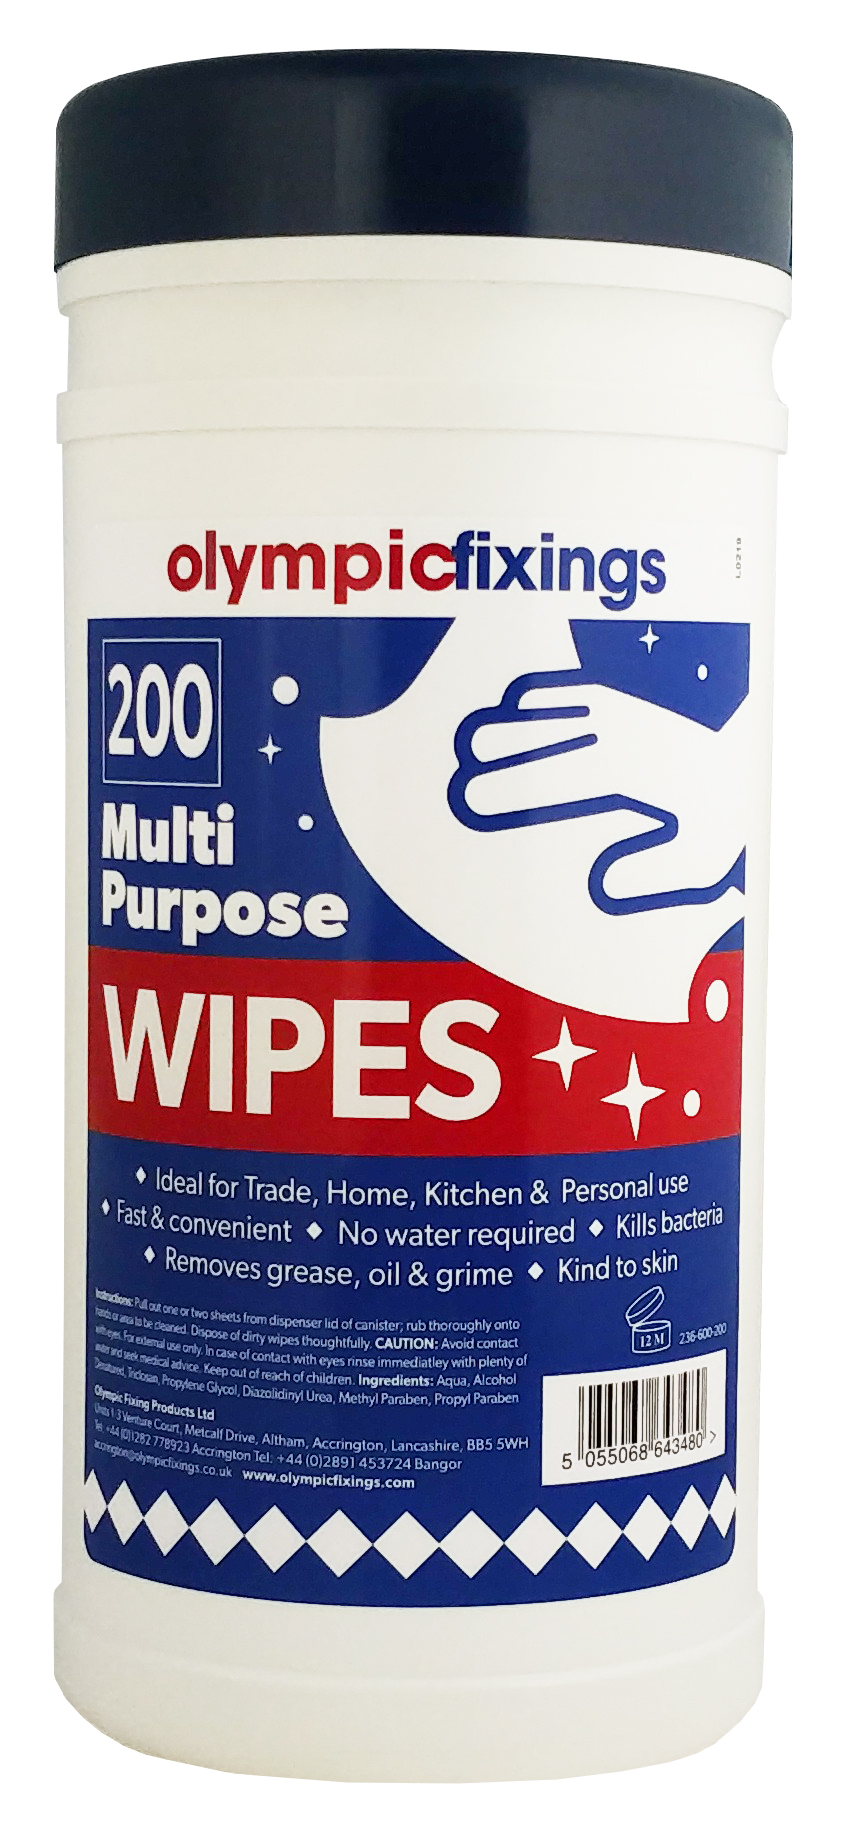 Clean Up Wipes